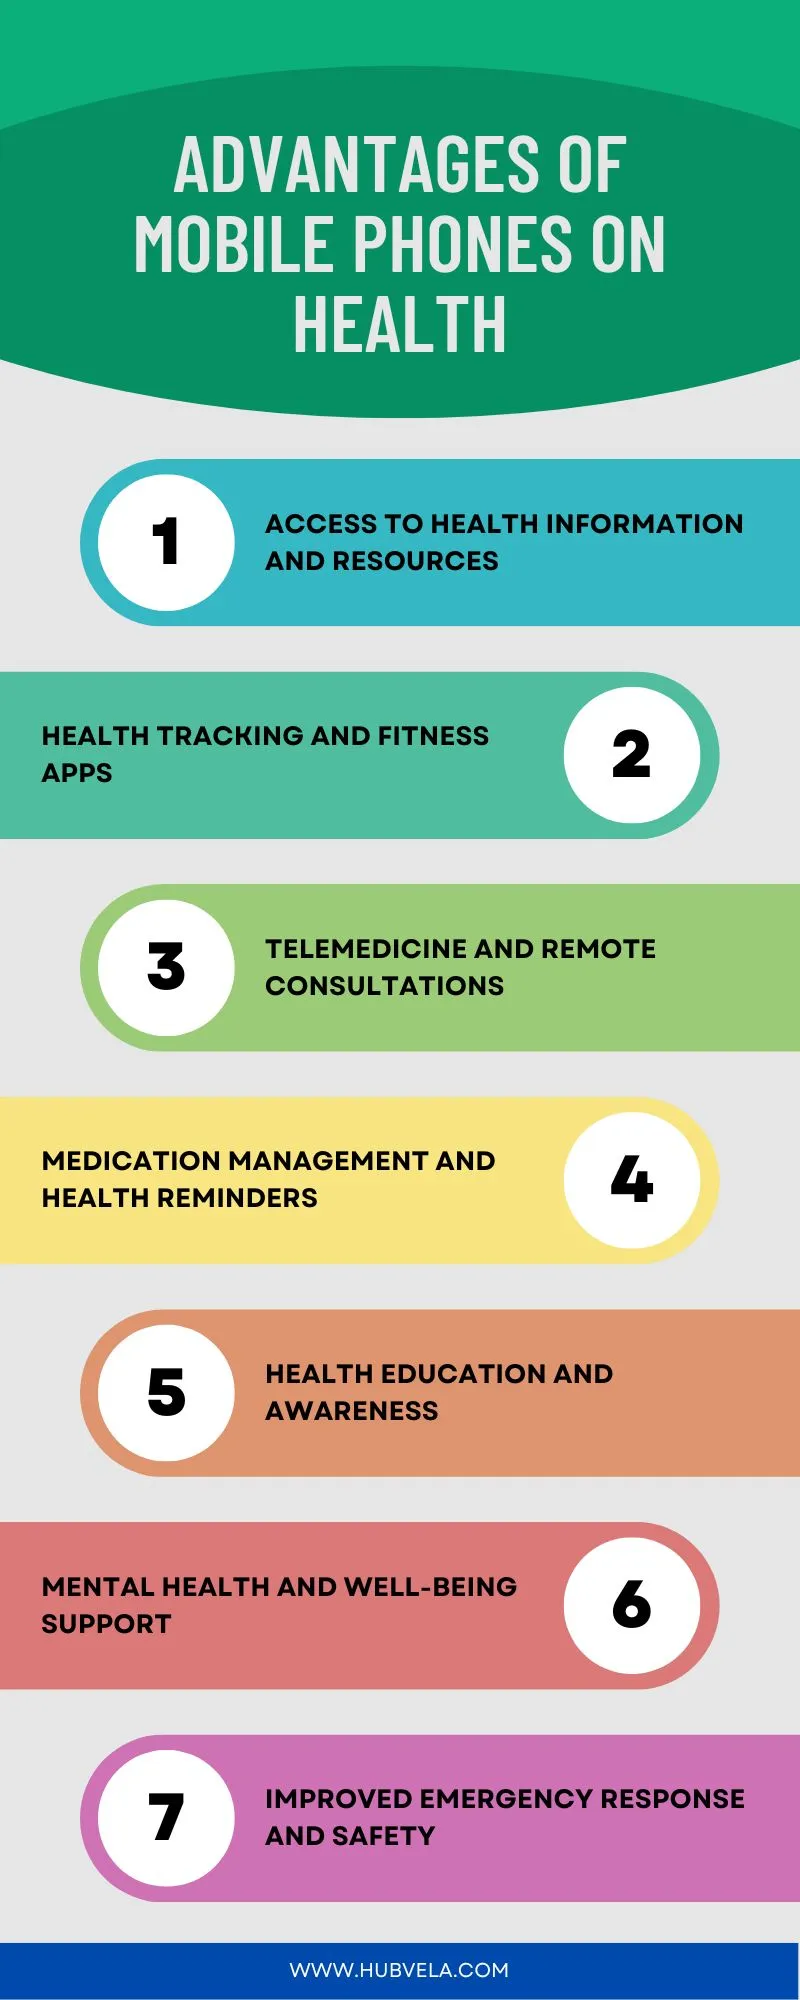 Advantages of Mobile Phones on Health Infographic